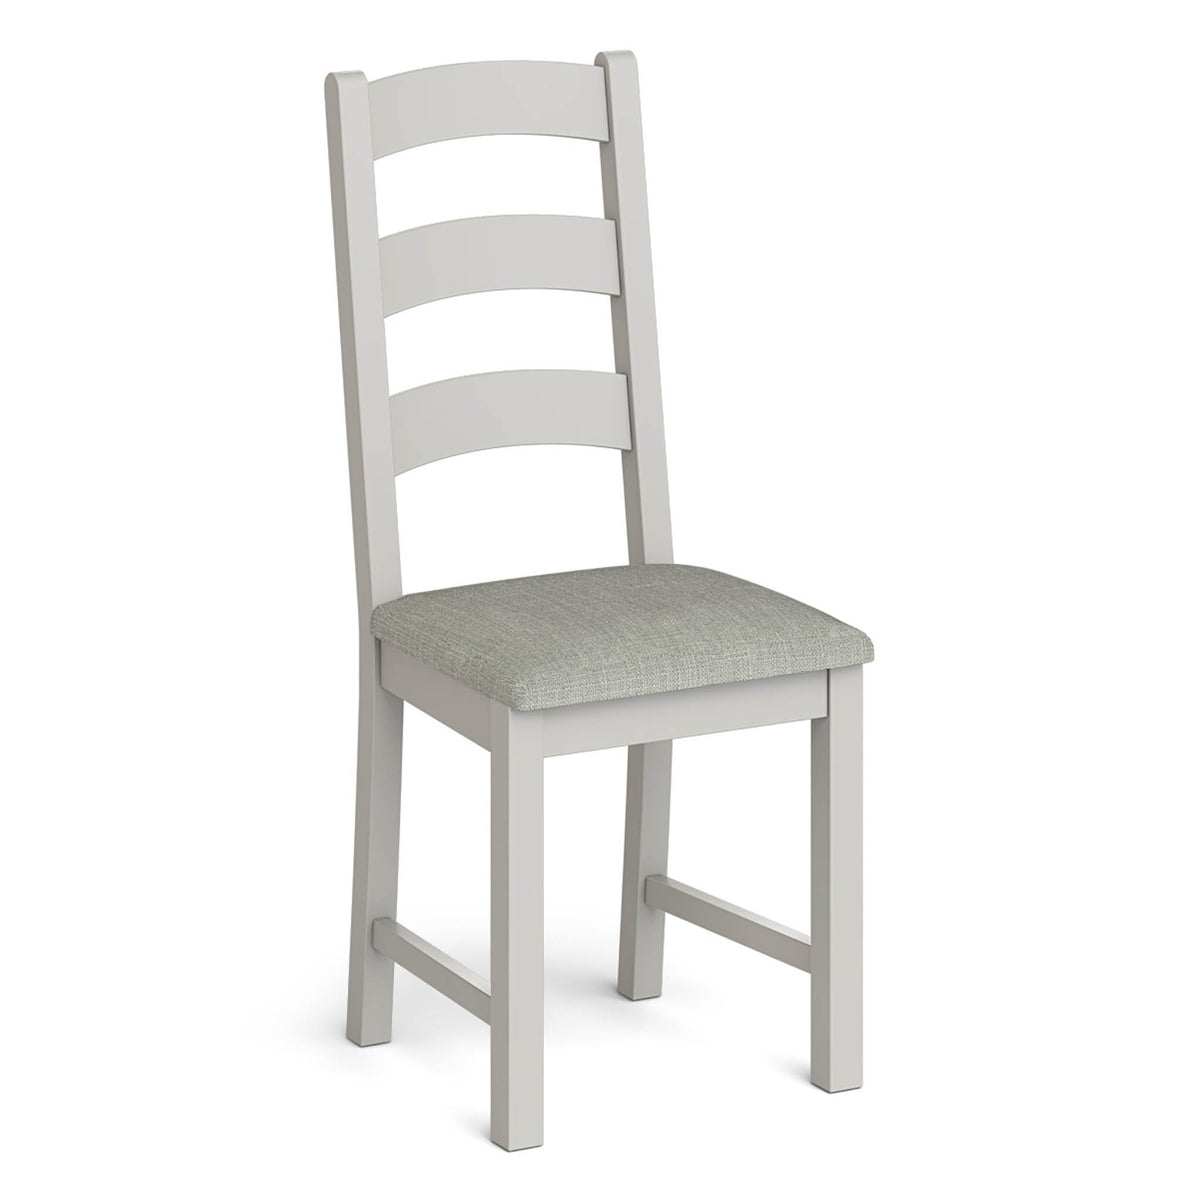 Lundy Grey Ladder Back Dining Chair by Roseland Furniture